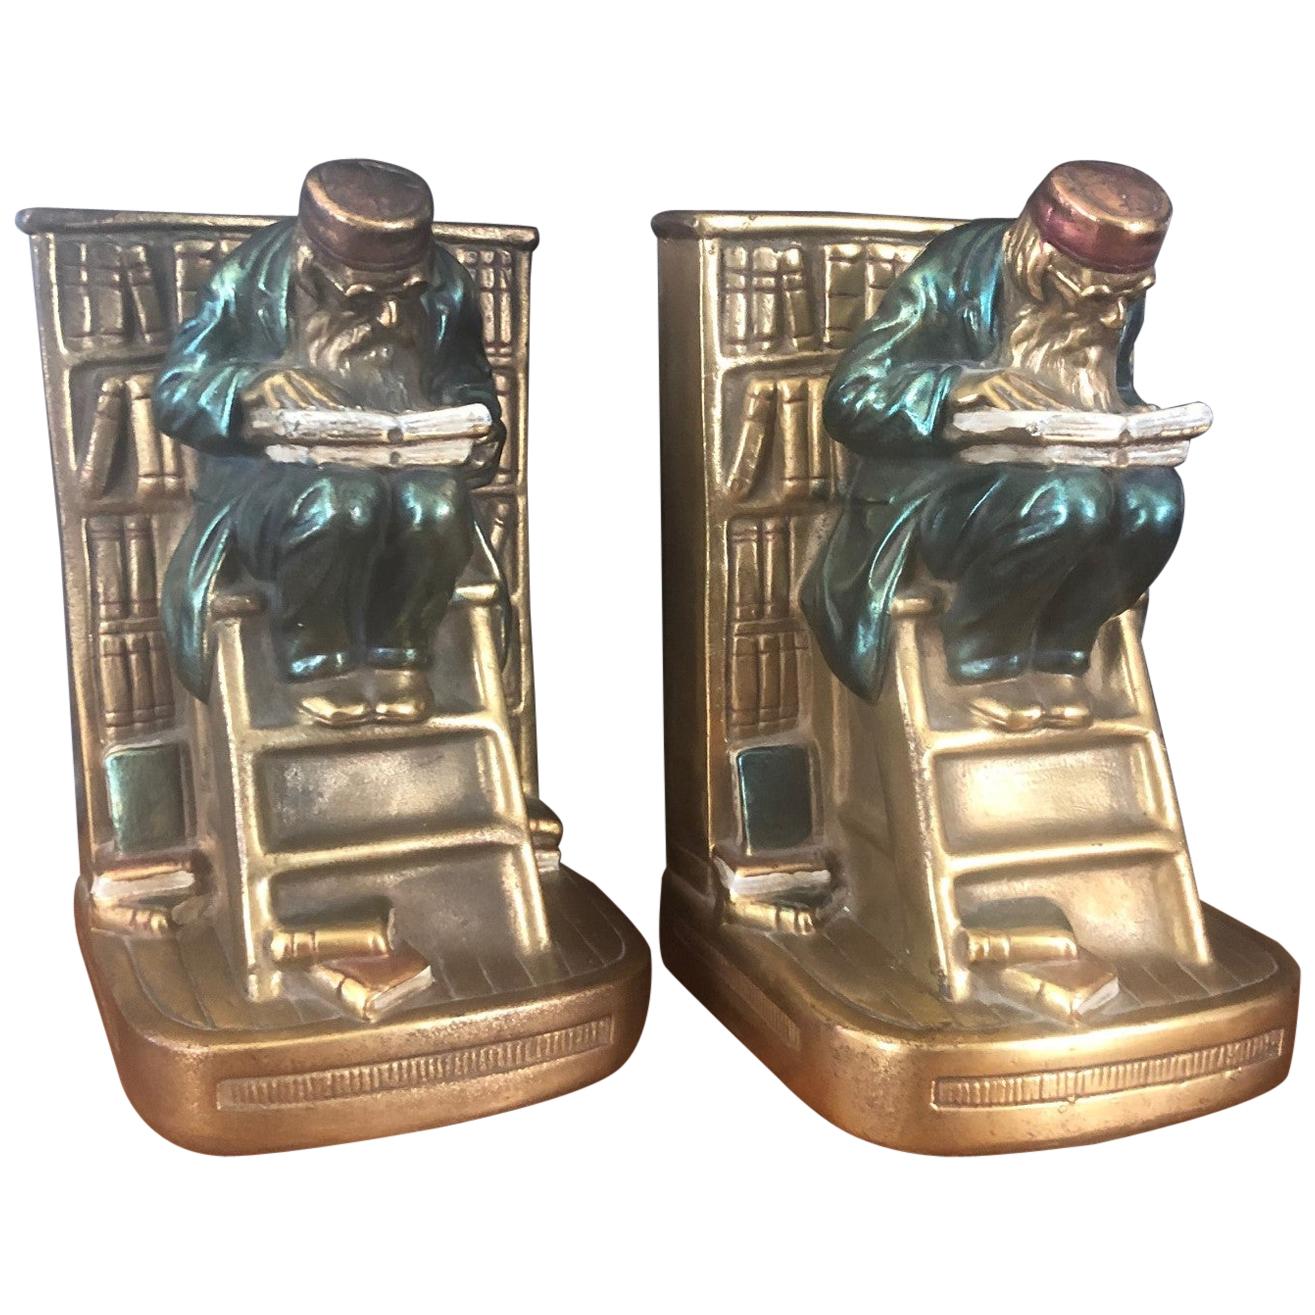 Pair of Bronze Clad "Old Professor" Bookends by Marion Bronze Co.